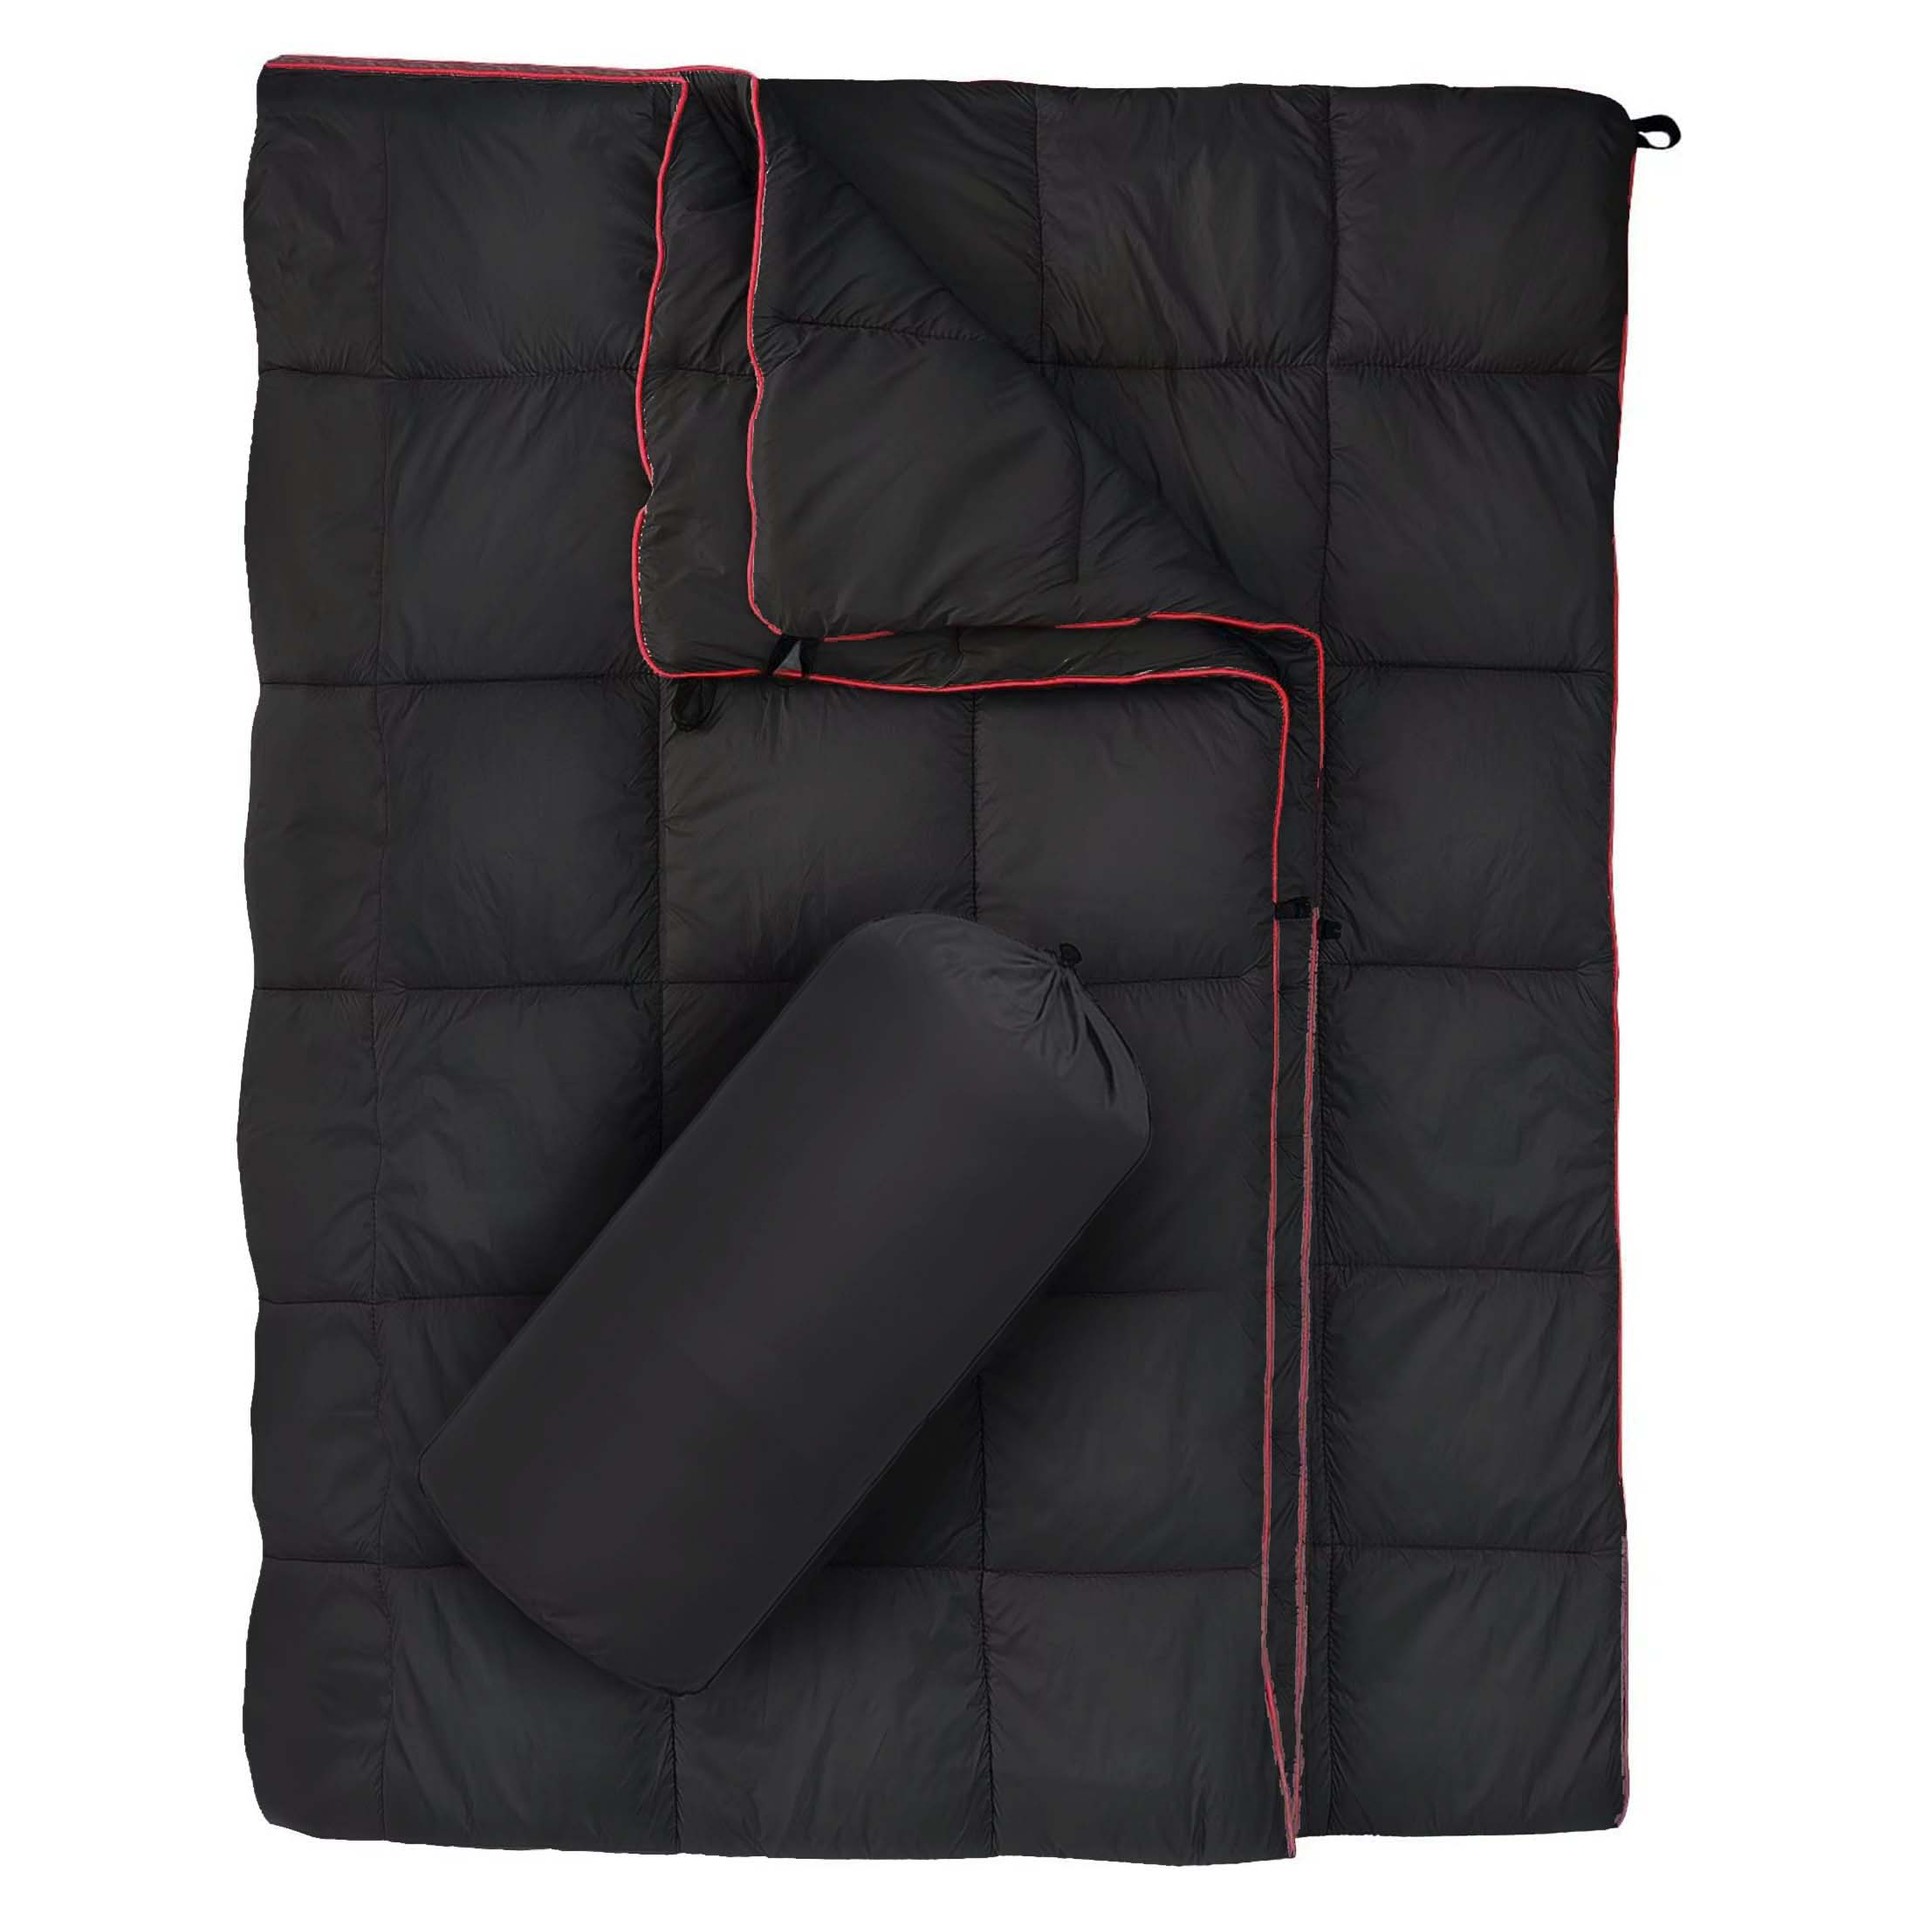 OUTDOOR&SPORTS OUTDOOR CUSHION PAD